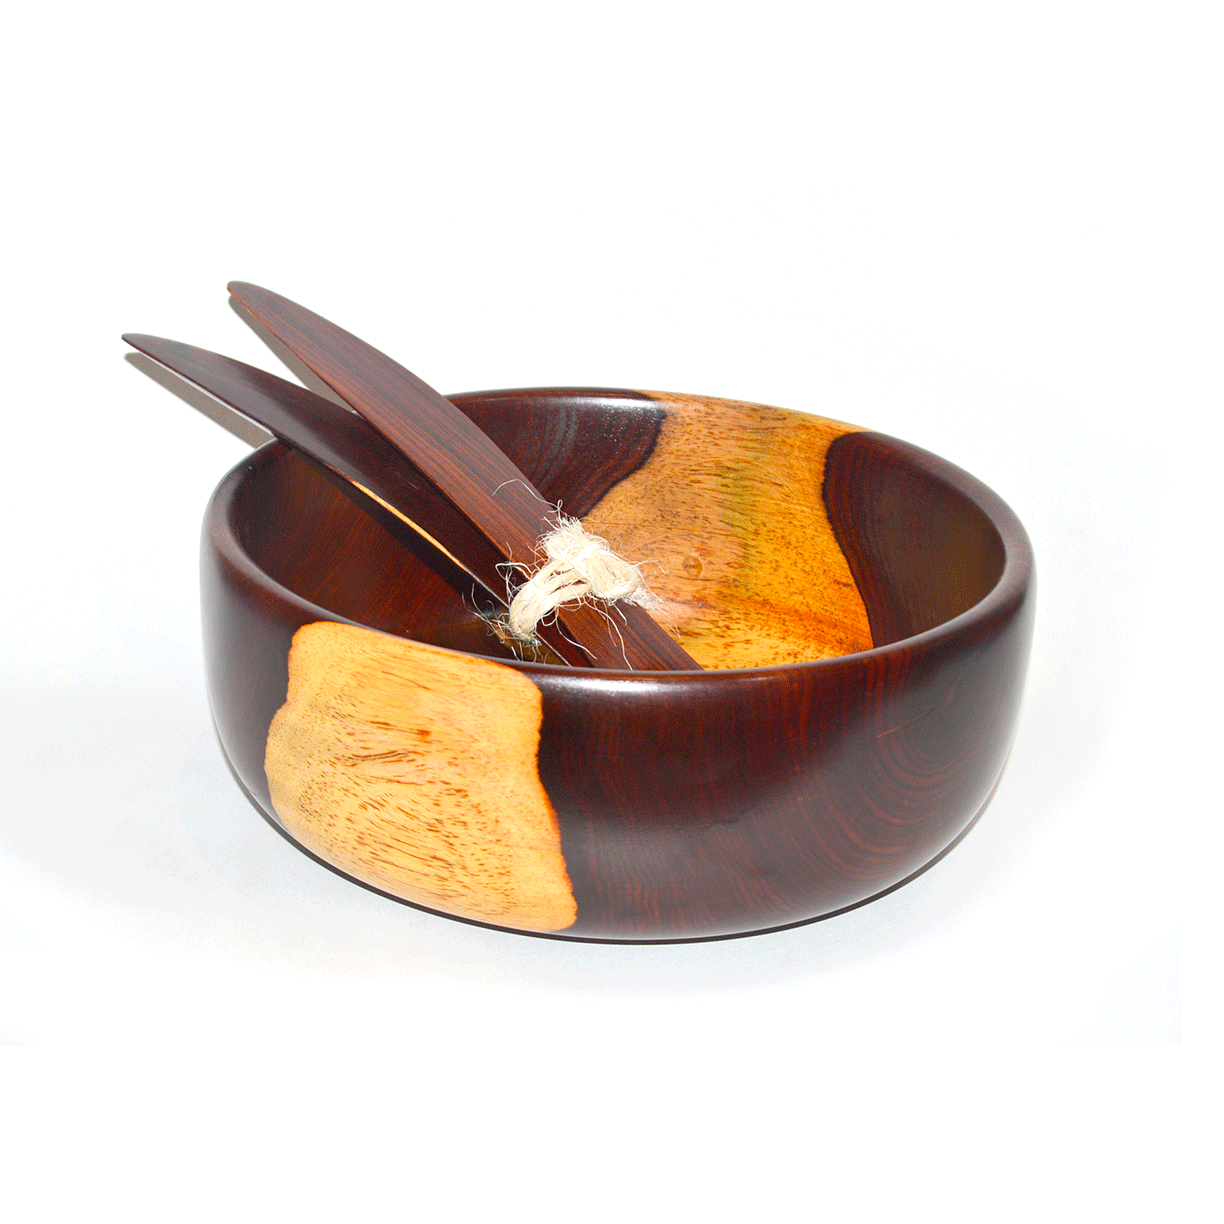 www.costaricacongo.com www.costaricagiftshops.com gift souvenir handmade Wooden Salad Bowl 10" Rosewood with Serving tools